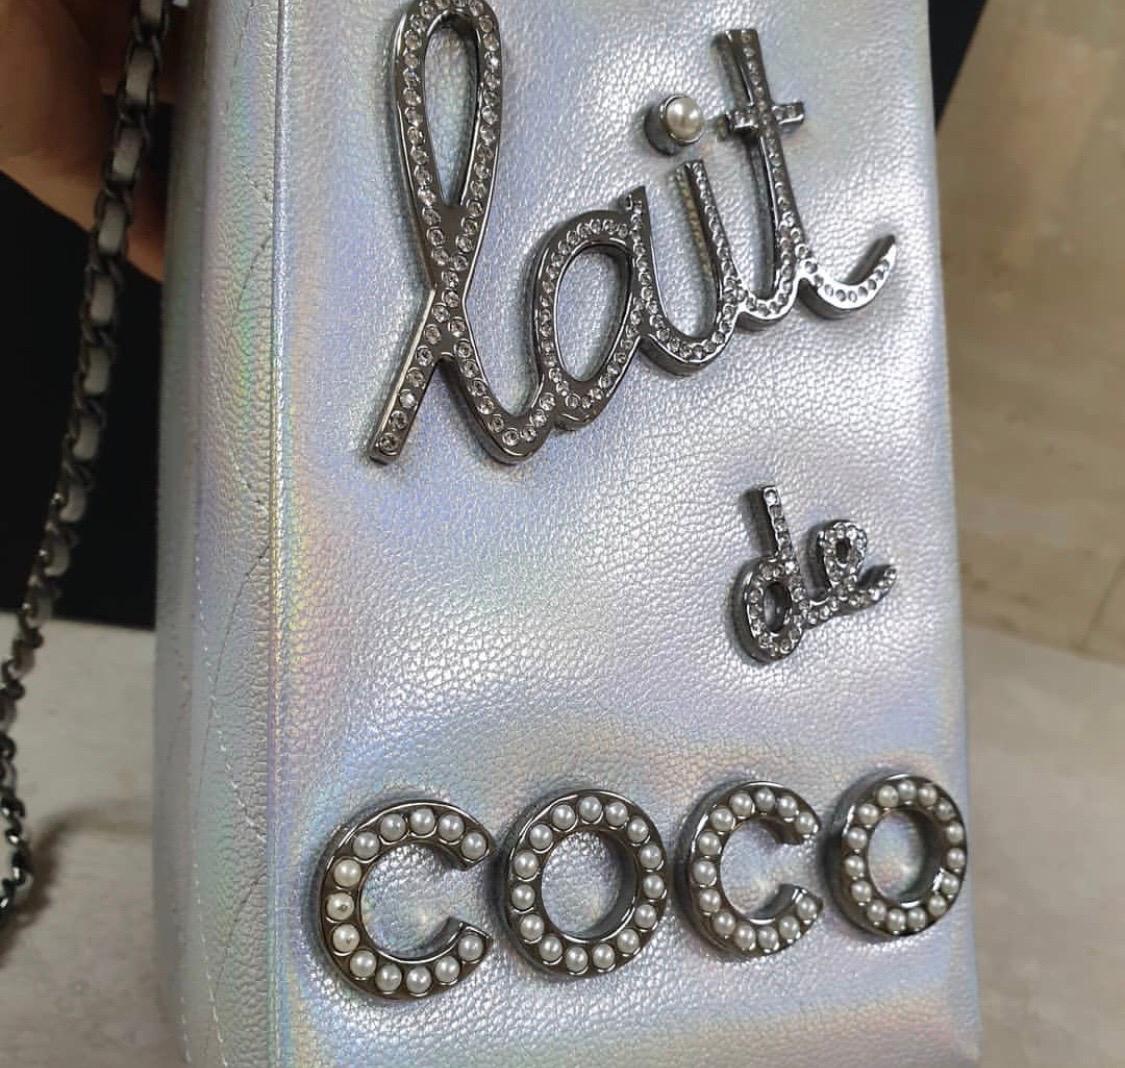 Pour yourself a long, tall glass of Chanel from this Iridescent Silver Lait de Coco Milk Carton Bag! Here's a bag you don't see every day. It's made of iridescent goatskin with diamond-quilted sides and gunmetal hardware, and the front face features